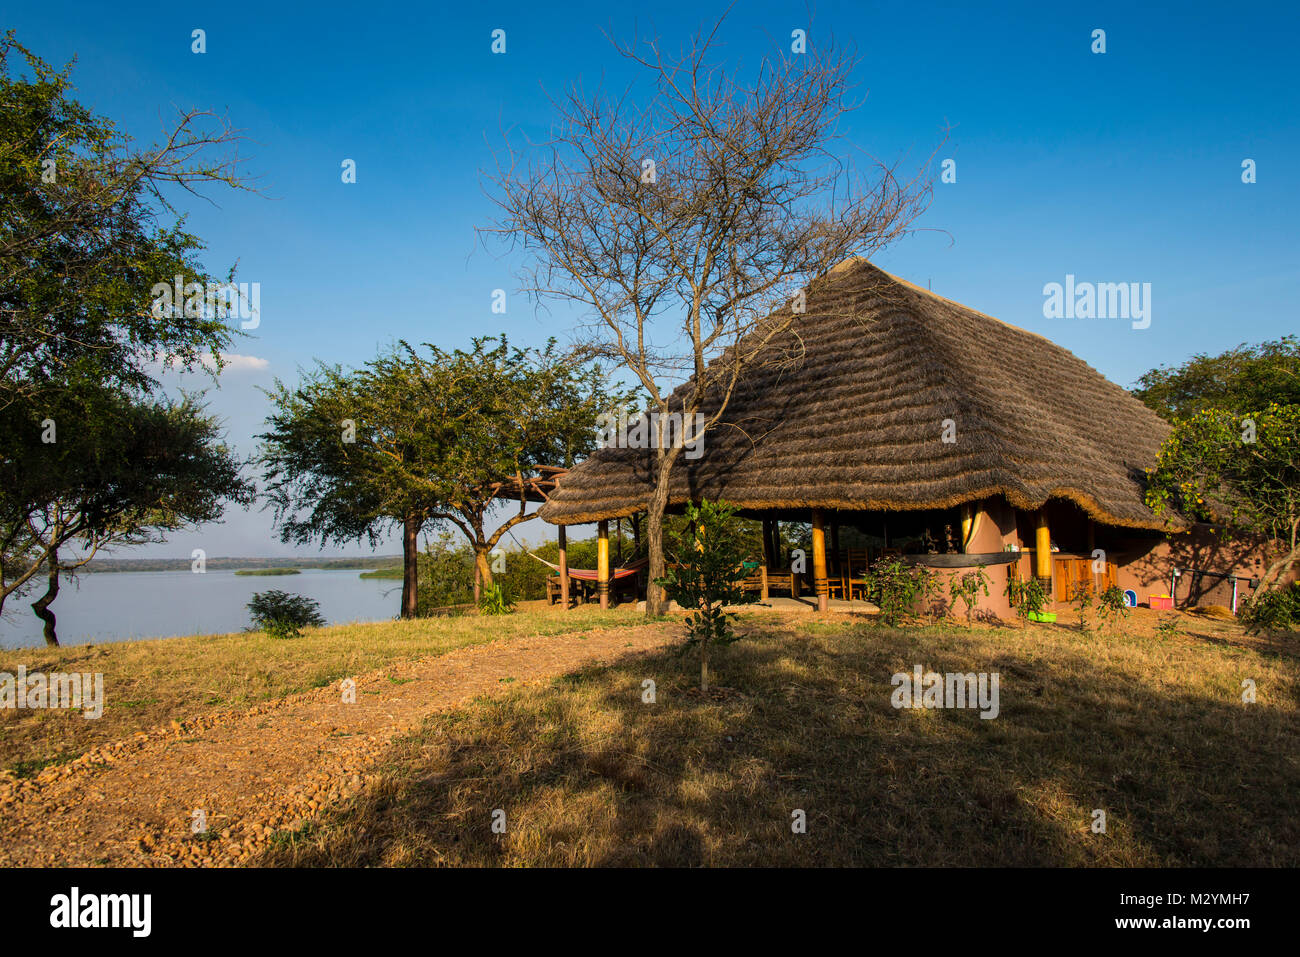 Restaurant of a luxury hotel overlooking the Nile, Murchison Falls National Park, Uganda, Africa Stock Photo